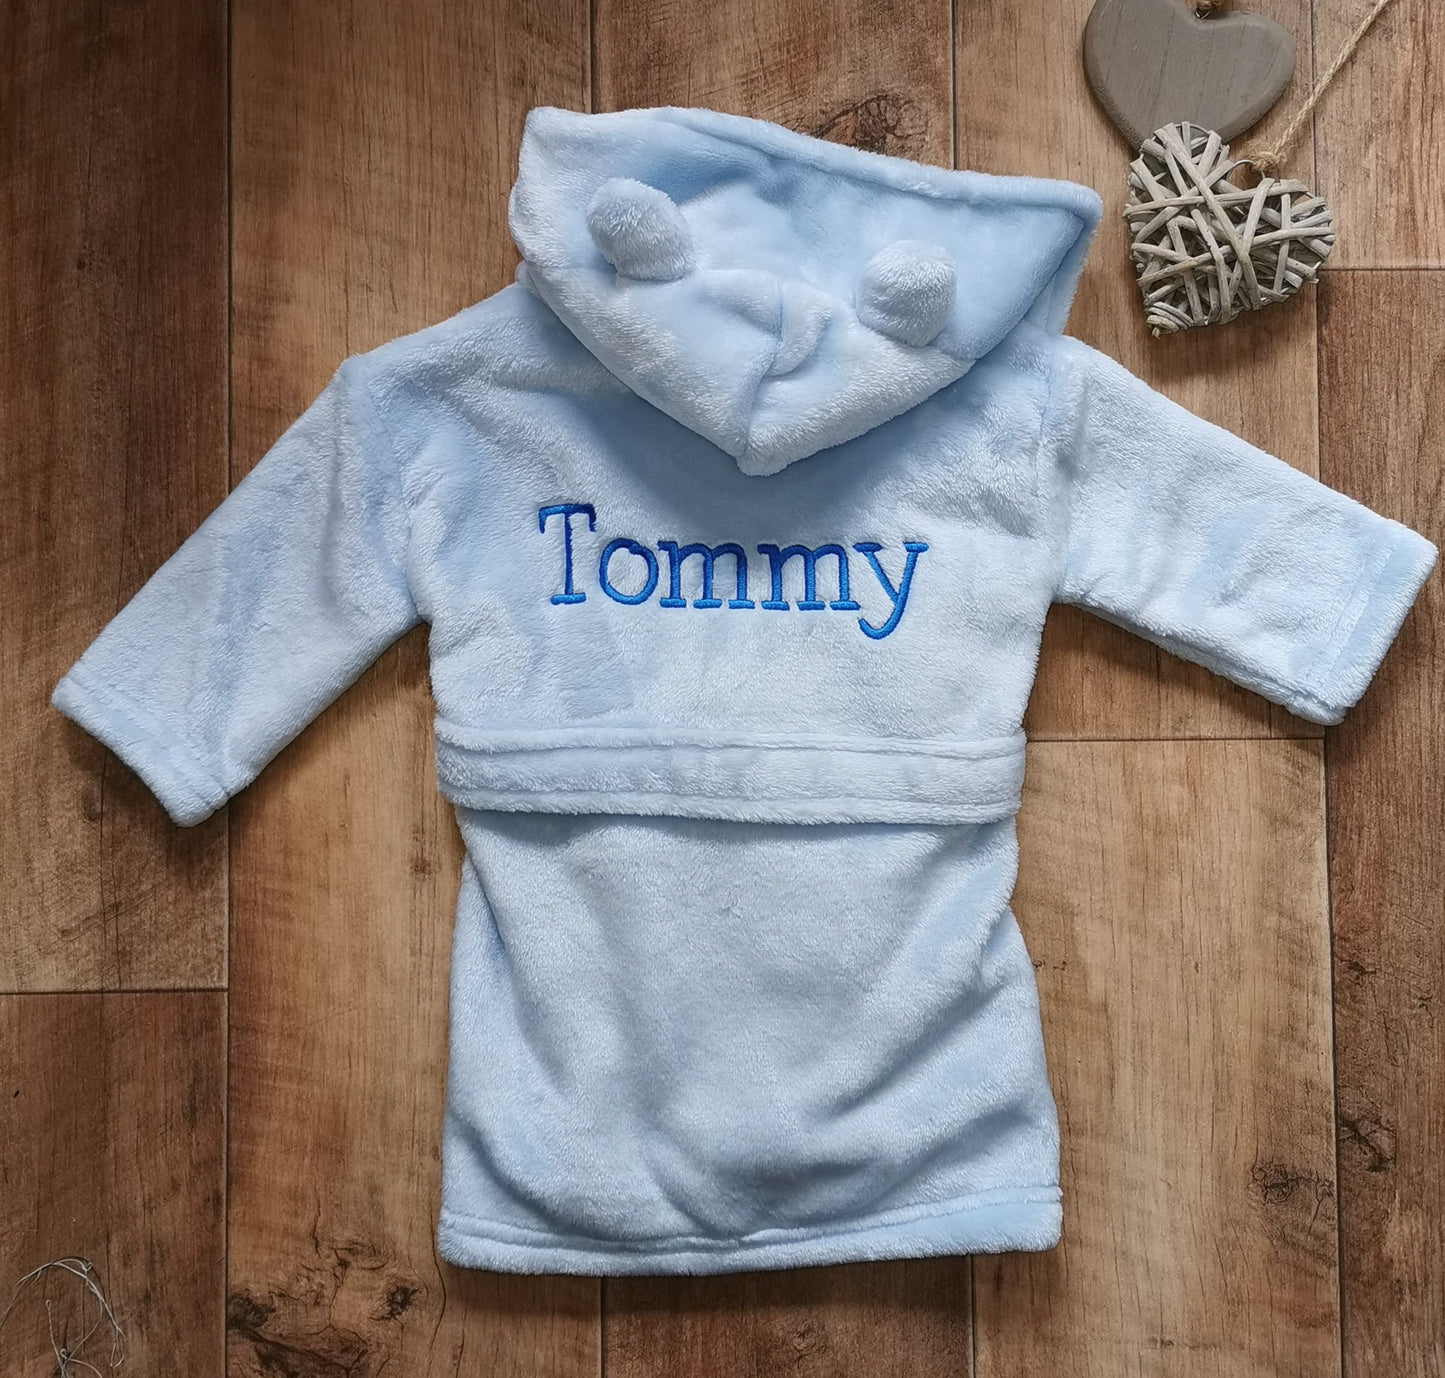 Personalised super soft blue hooded dressing gowns